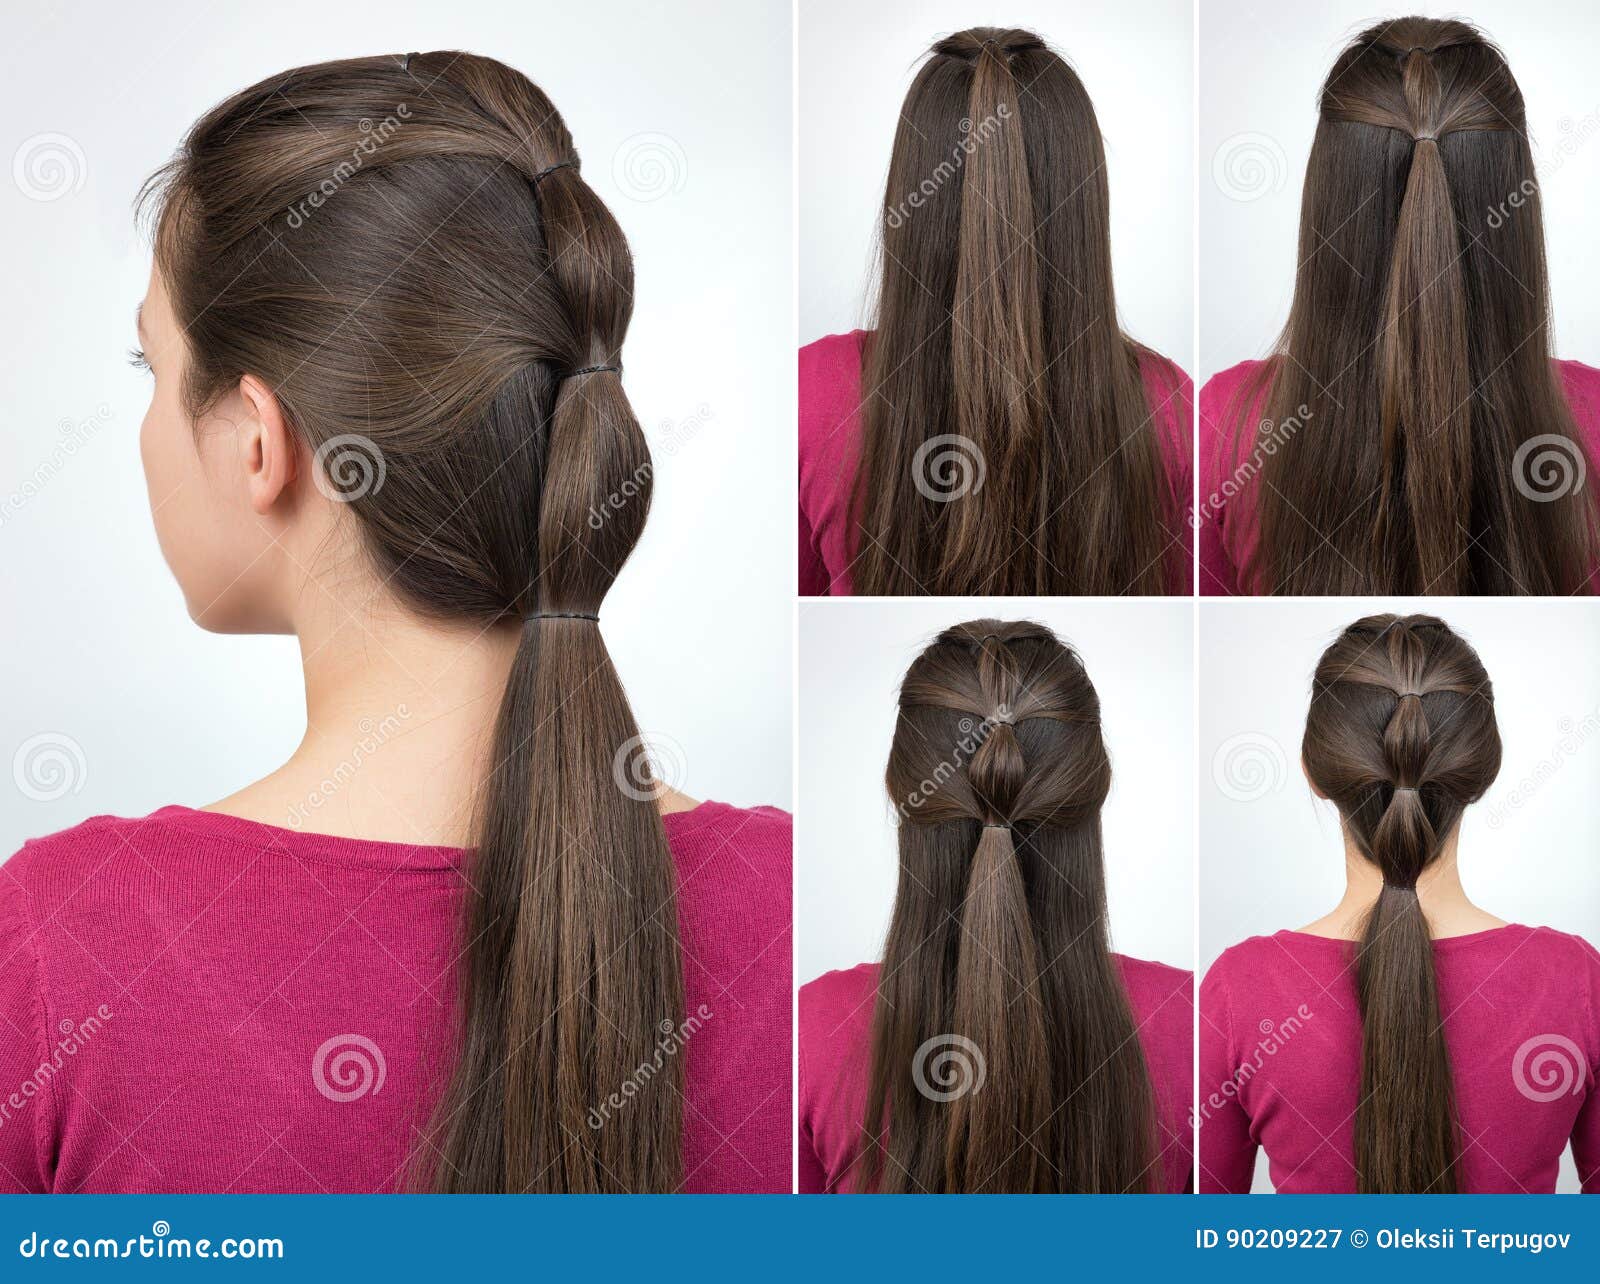 Hairstyle Pony Tail Tutorial Stock Image - Image of model, woman: 90209227